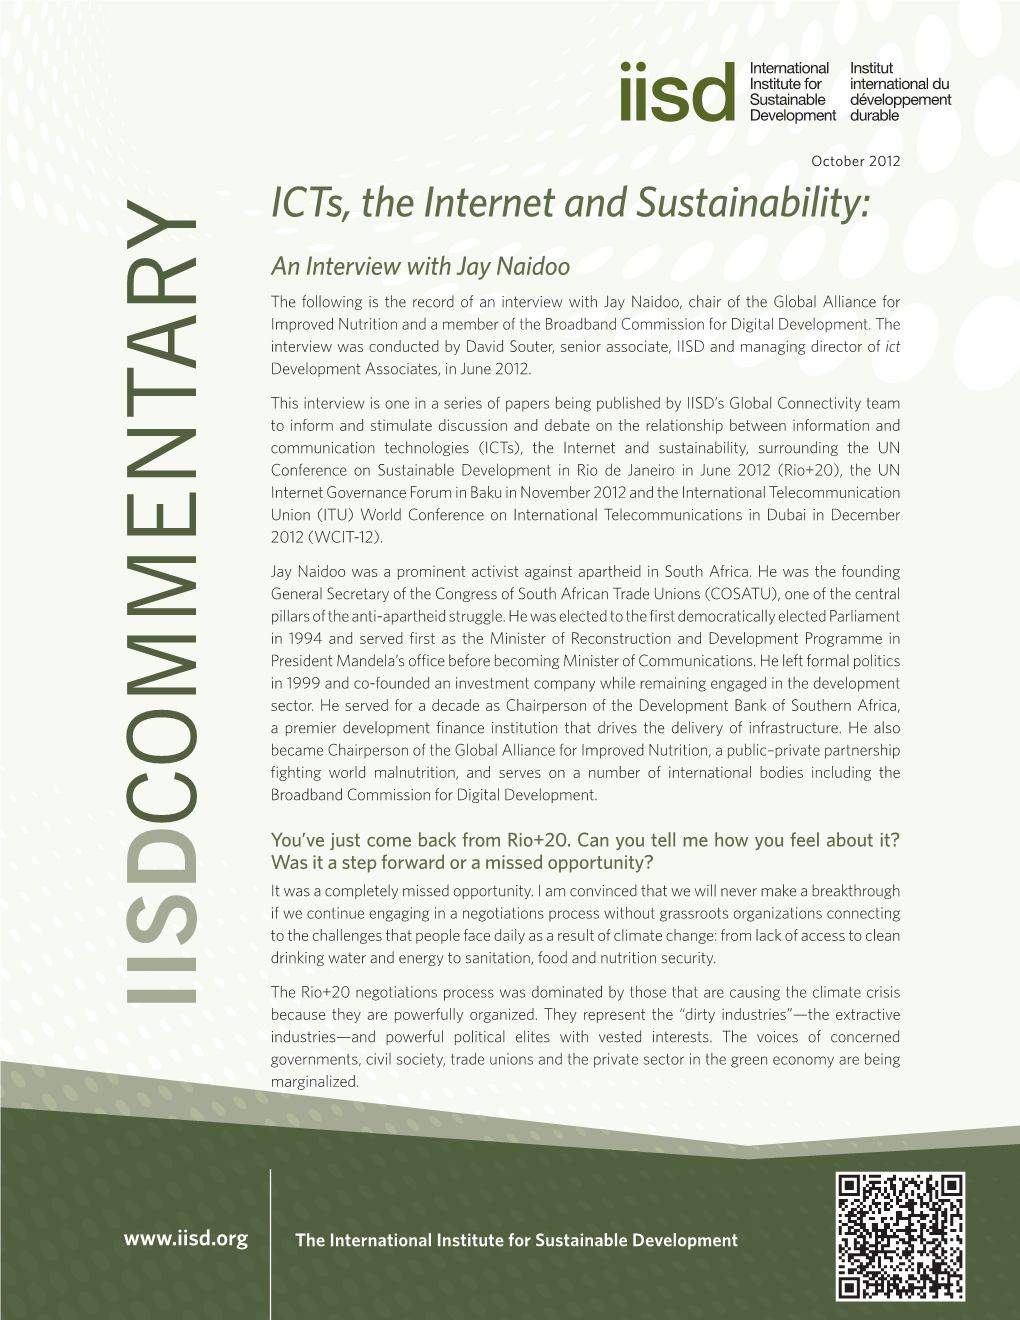 ICTS, the Internet and Sustainability: an Interview with Jay Naidoo